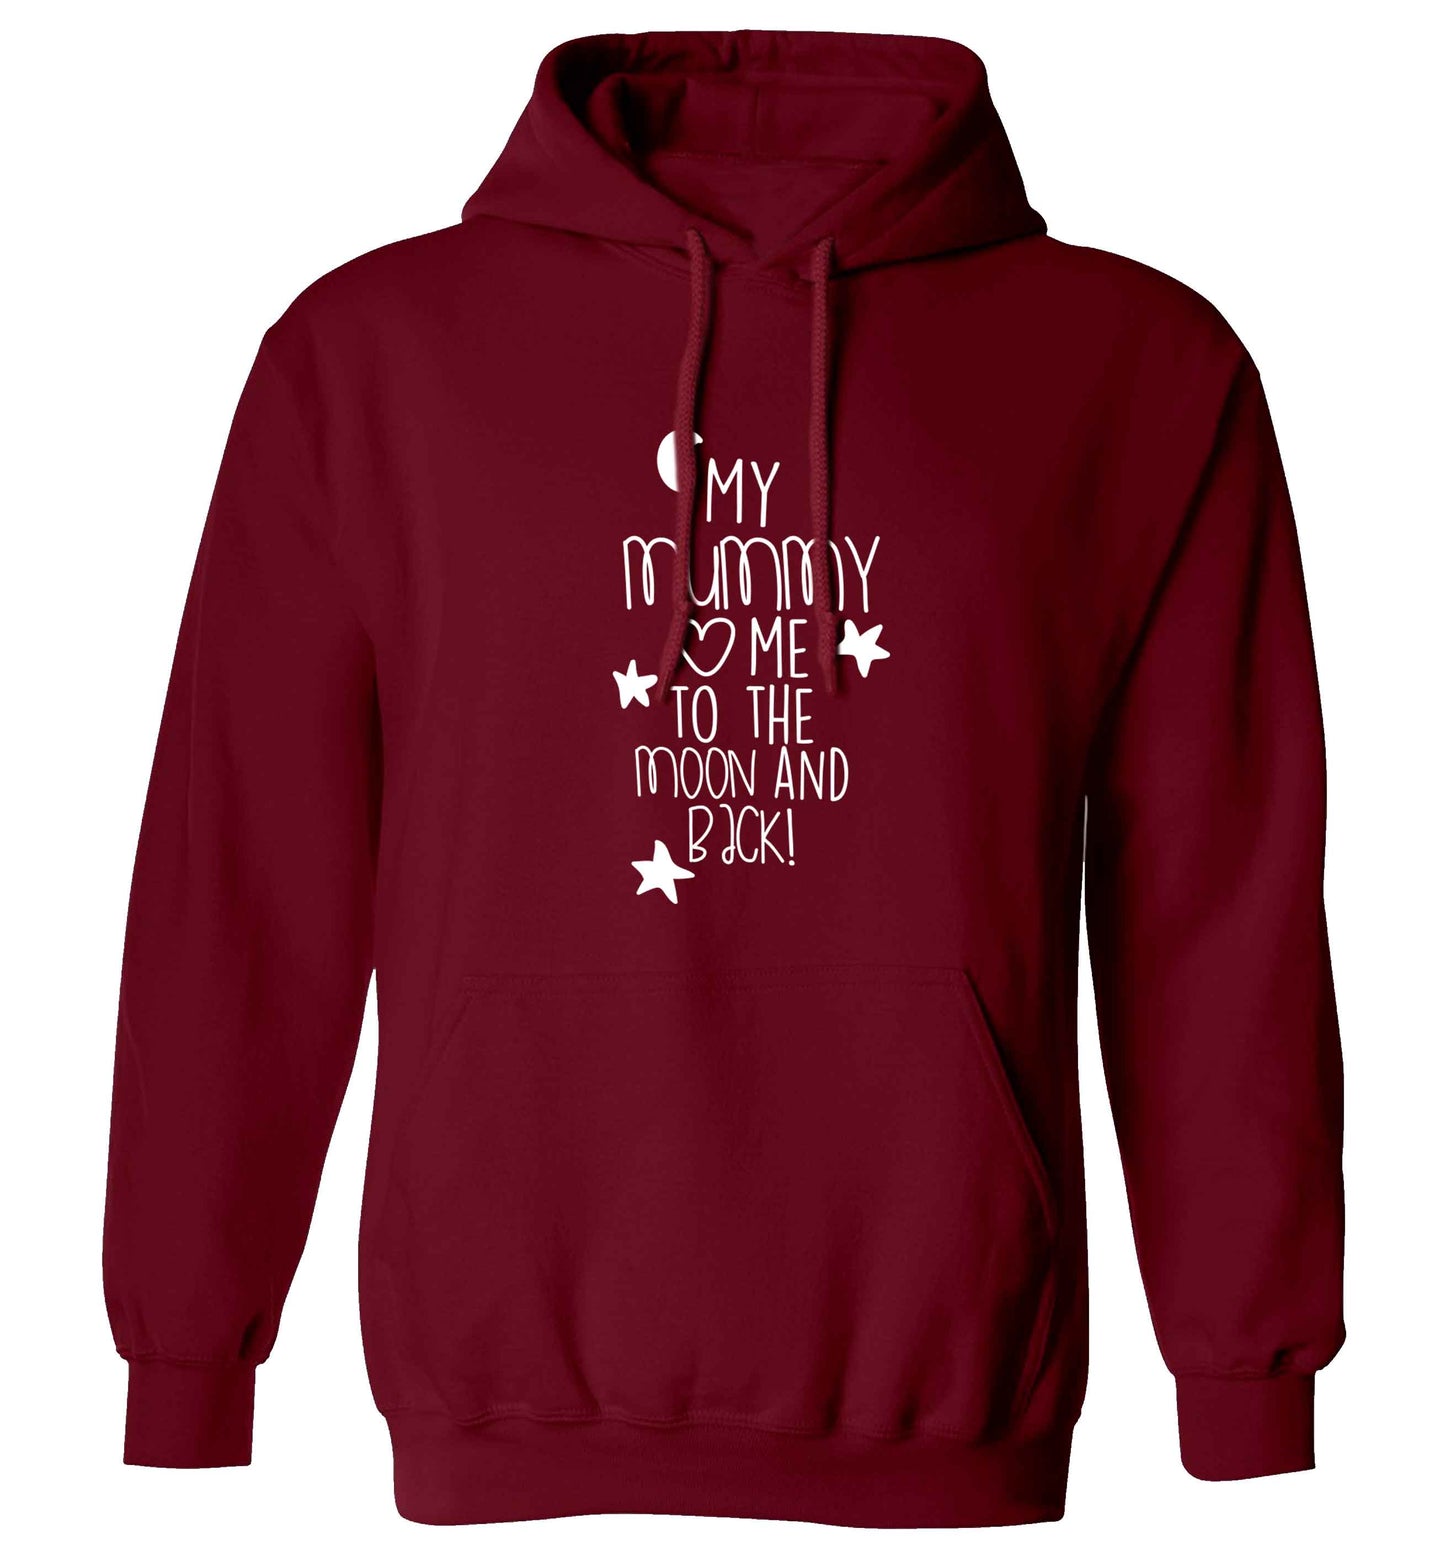 My mum loves me to the moon and back adults unisex maroon hoodie 2XL